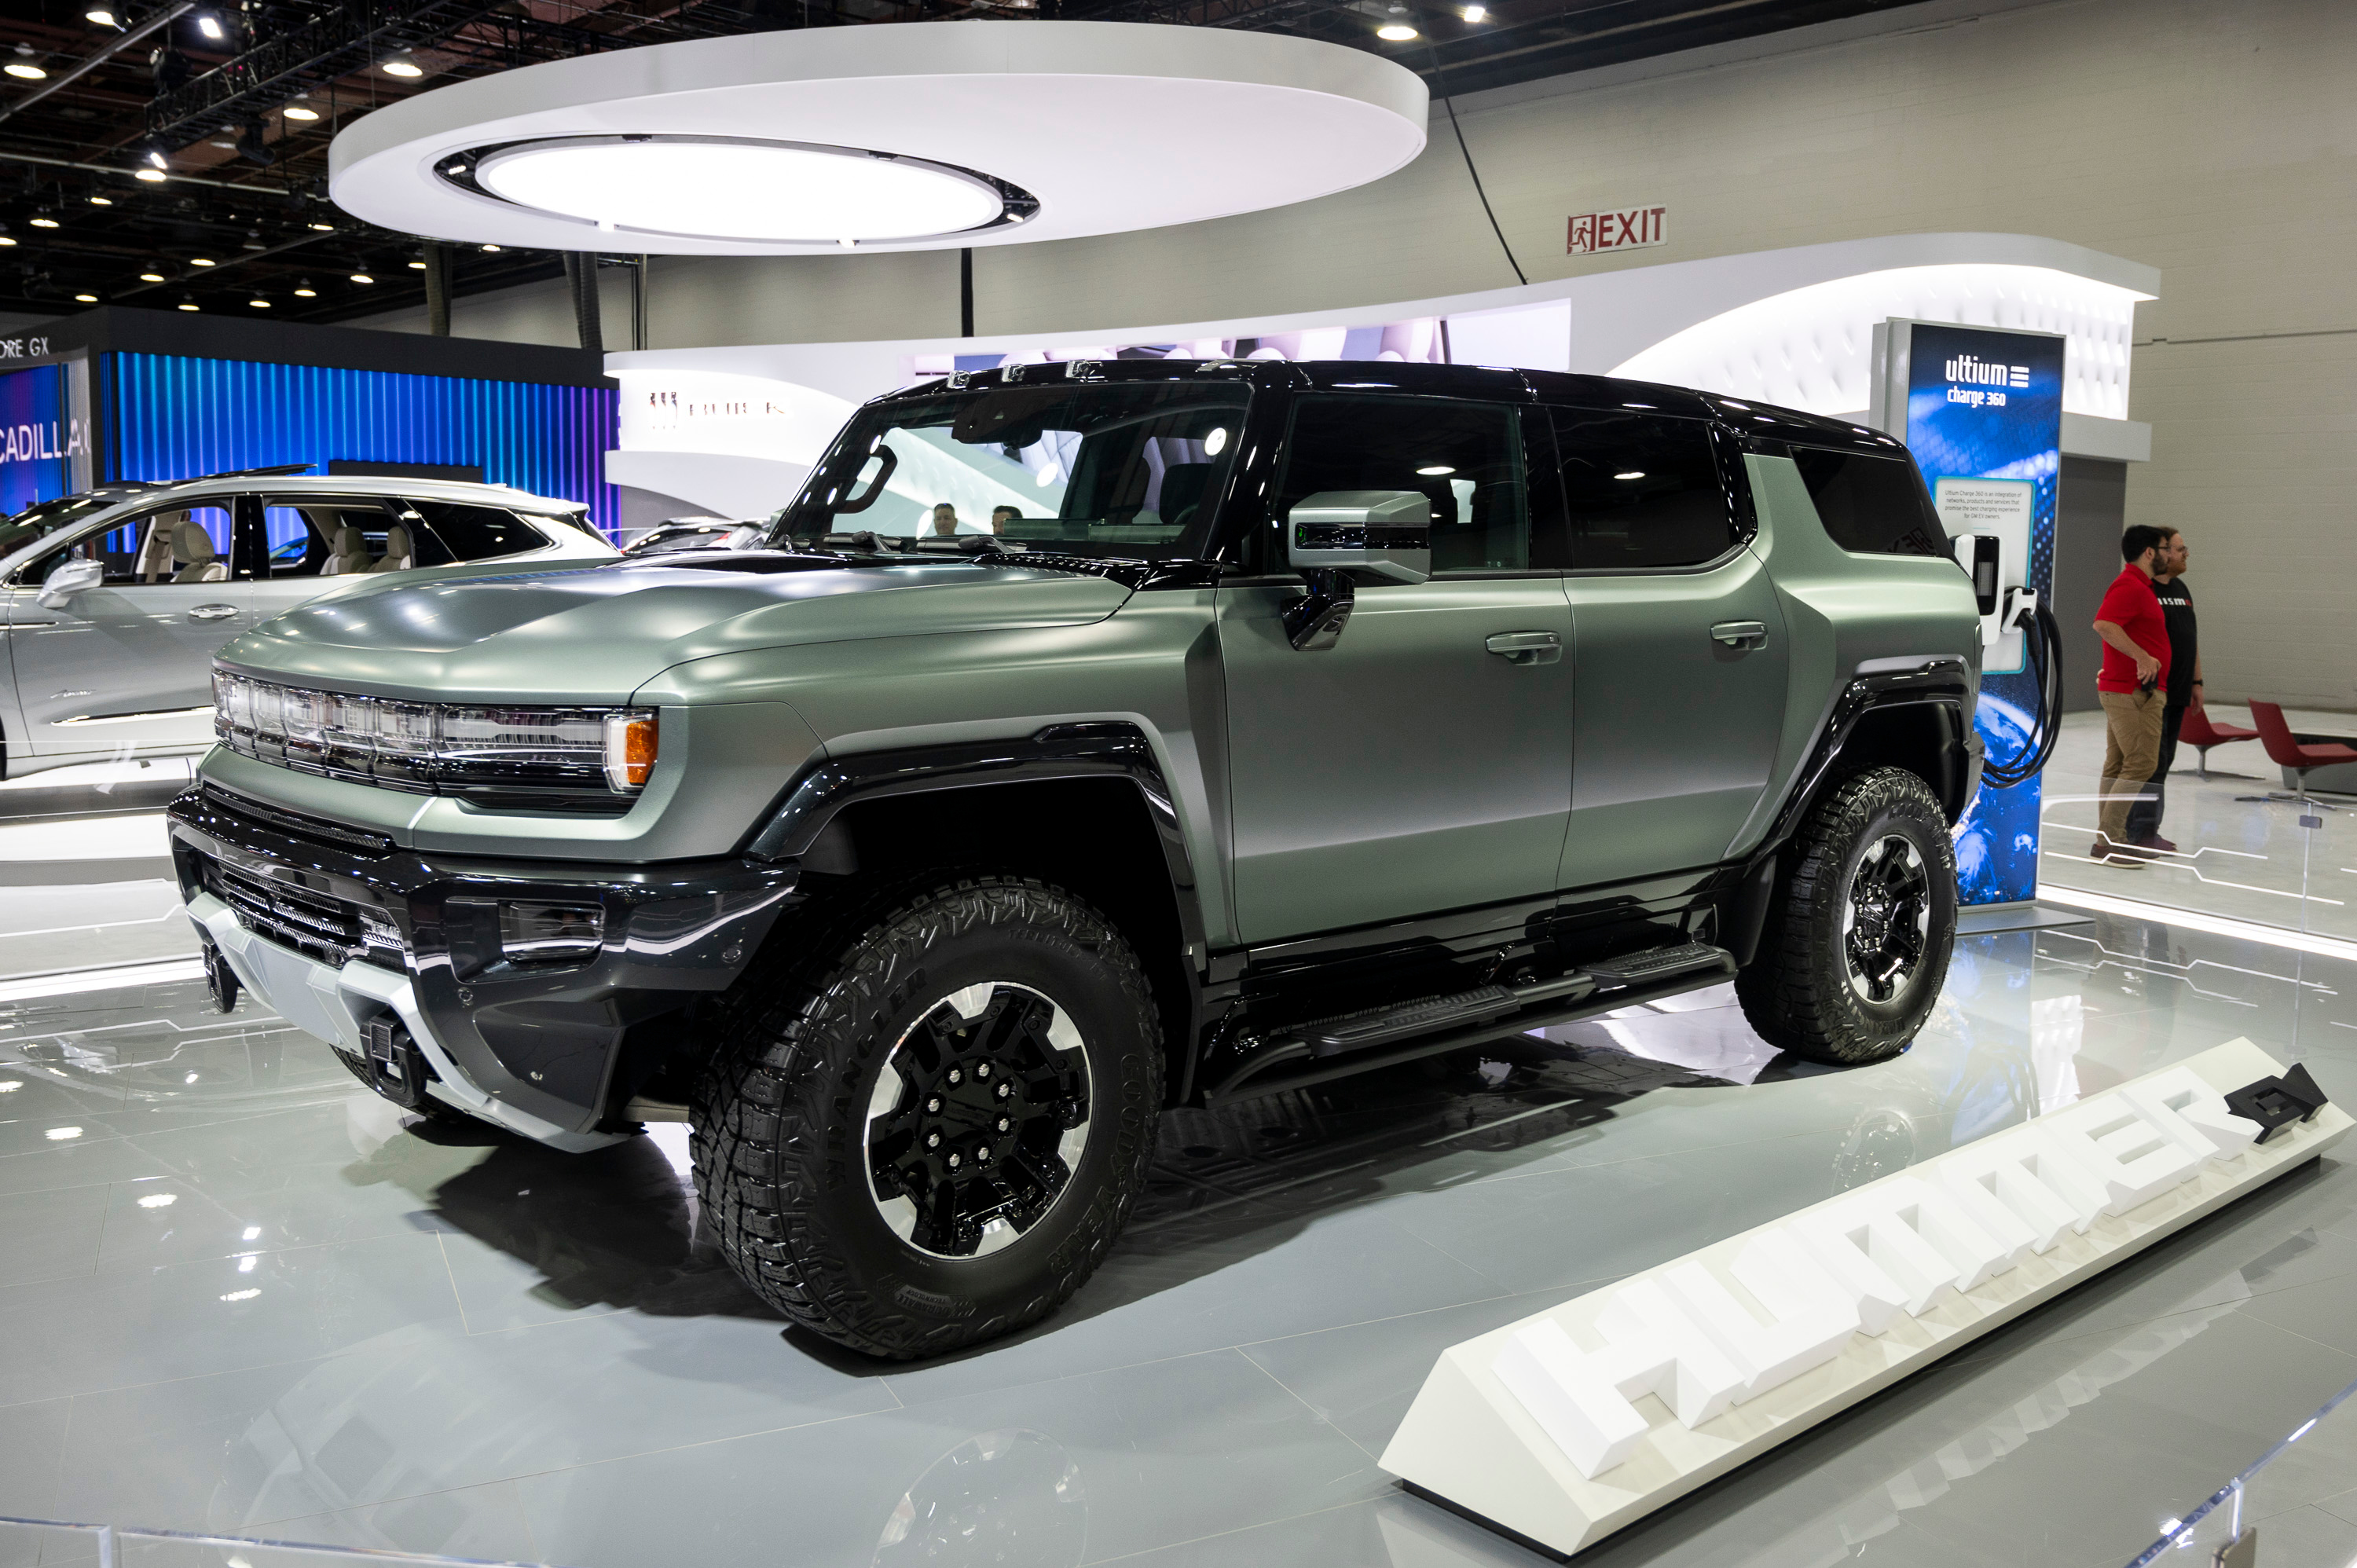 A Hummer EV on display during the 2022 North American International Auto Show at Huntington Place in Detroit on Wednesday, Sept. 14 2022.